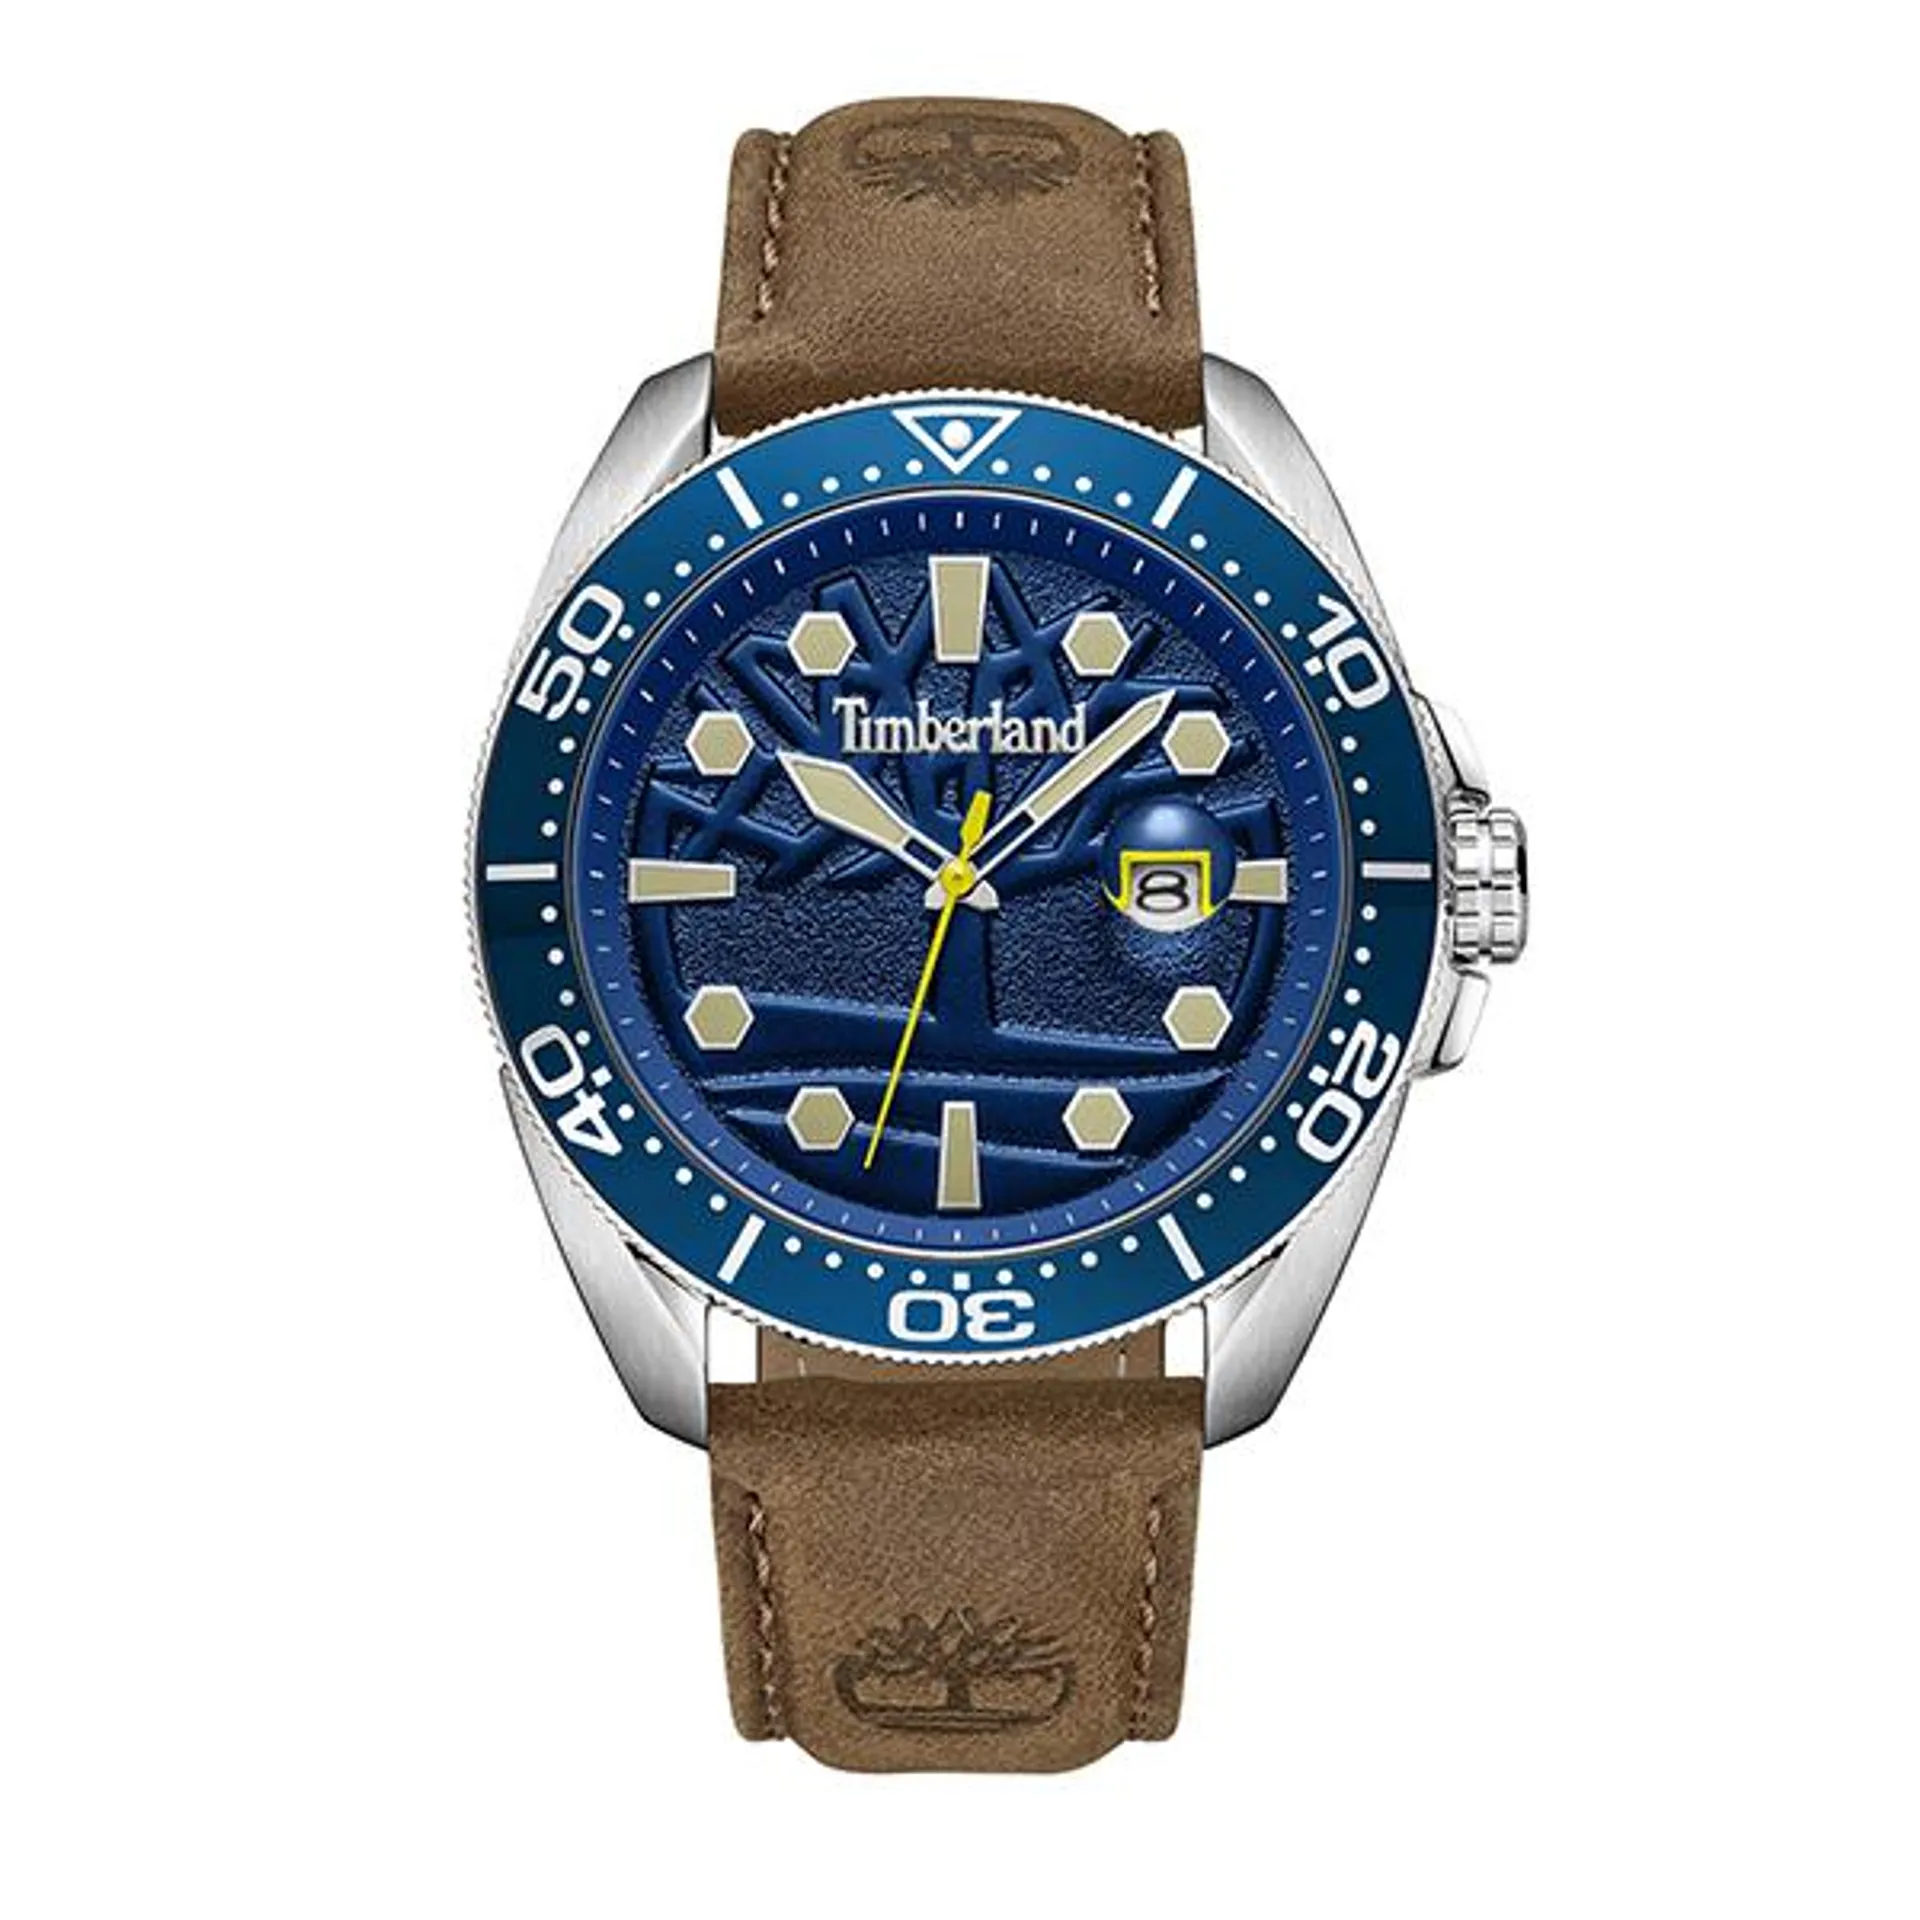 Timberland Gents Carrigan Watch with Genuine Leather Strap